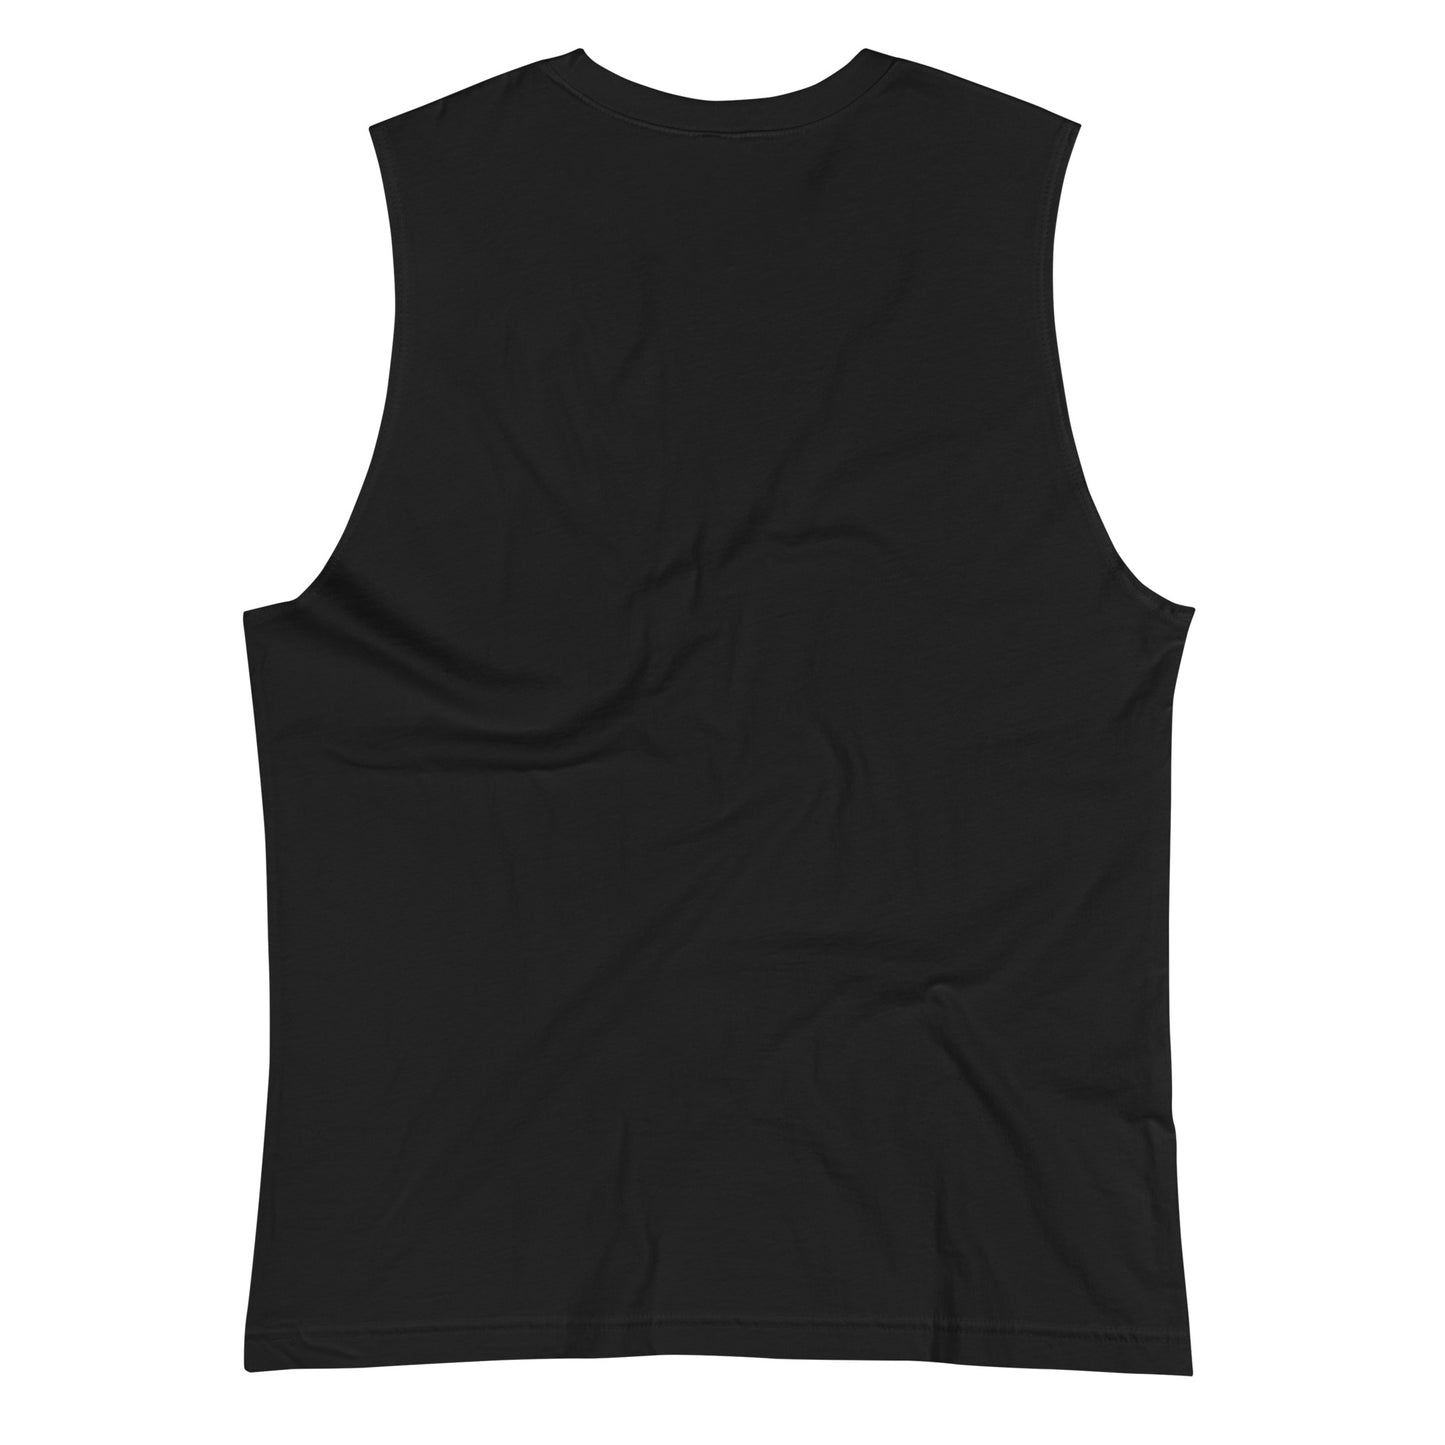 Provincetown Muscle Shirt